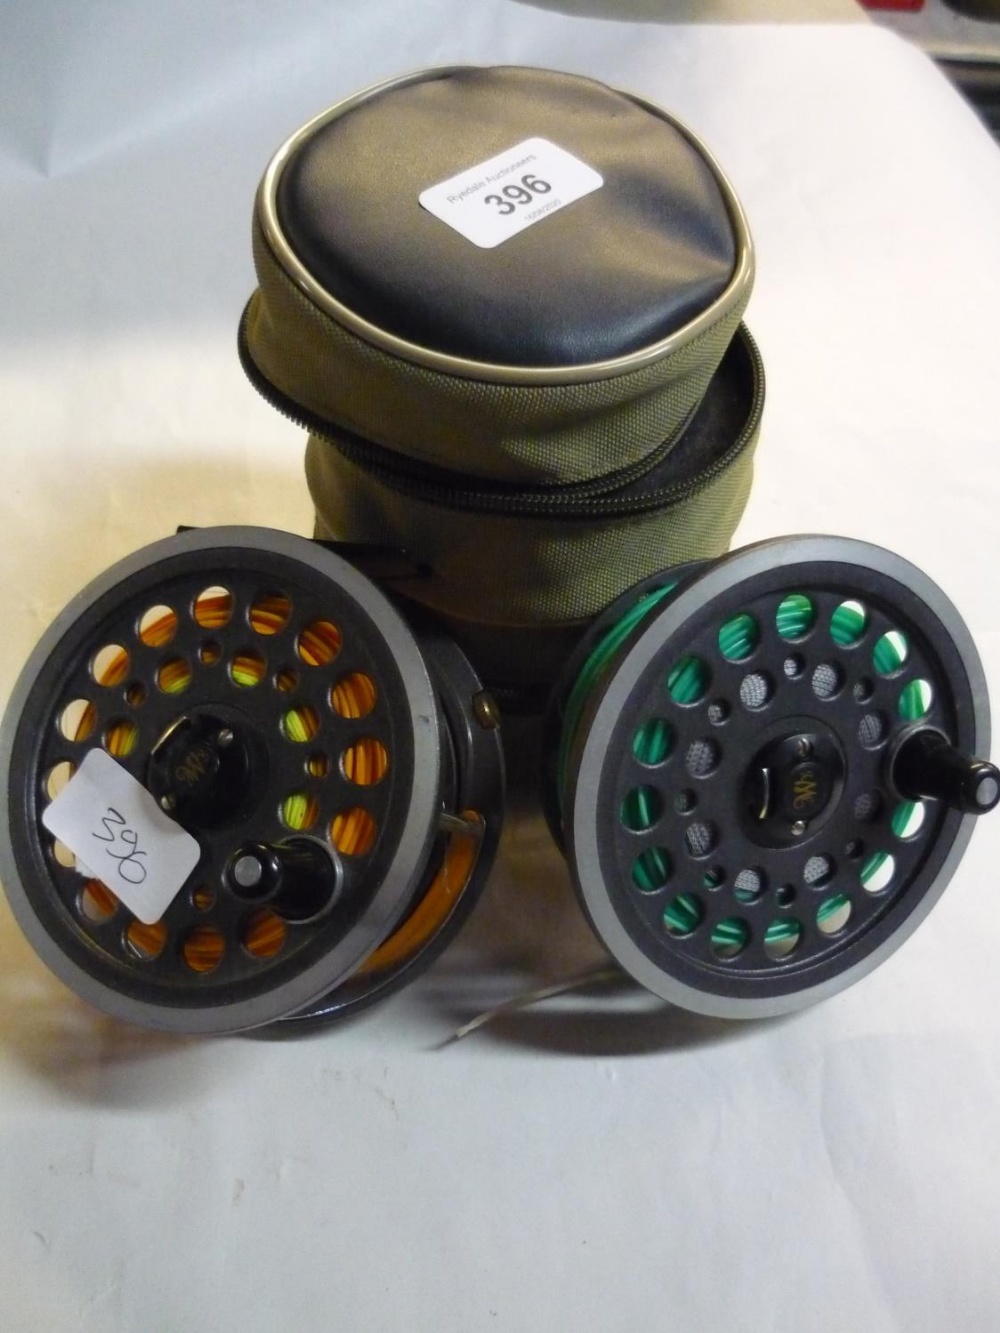 J W Young & Sons Ltd 1540 salmon fishing reel, with two spare spools, in Snowbee zip case